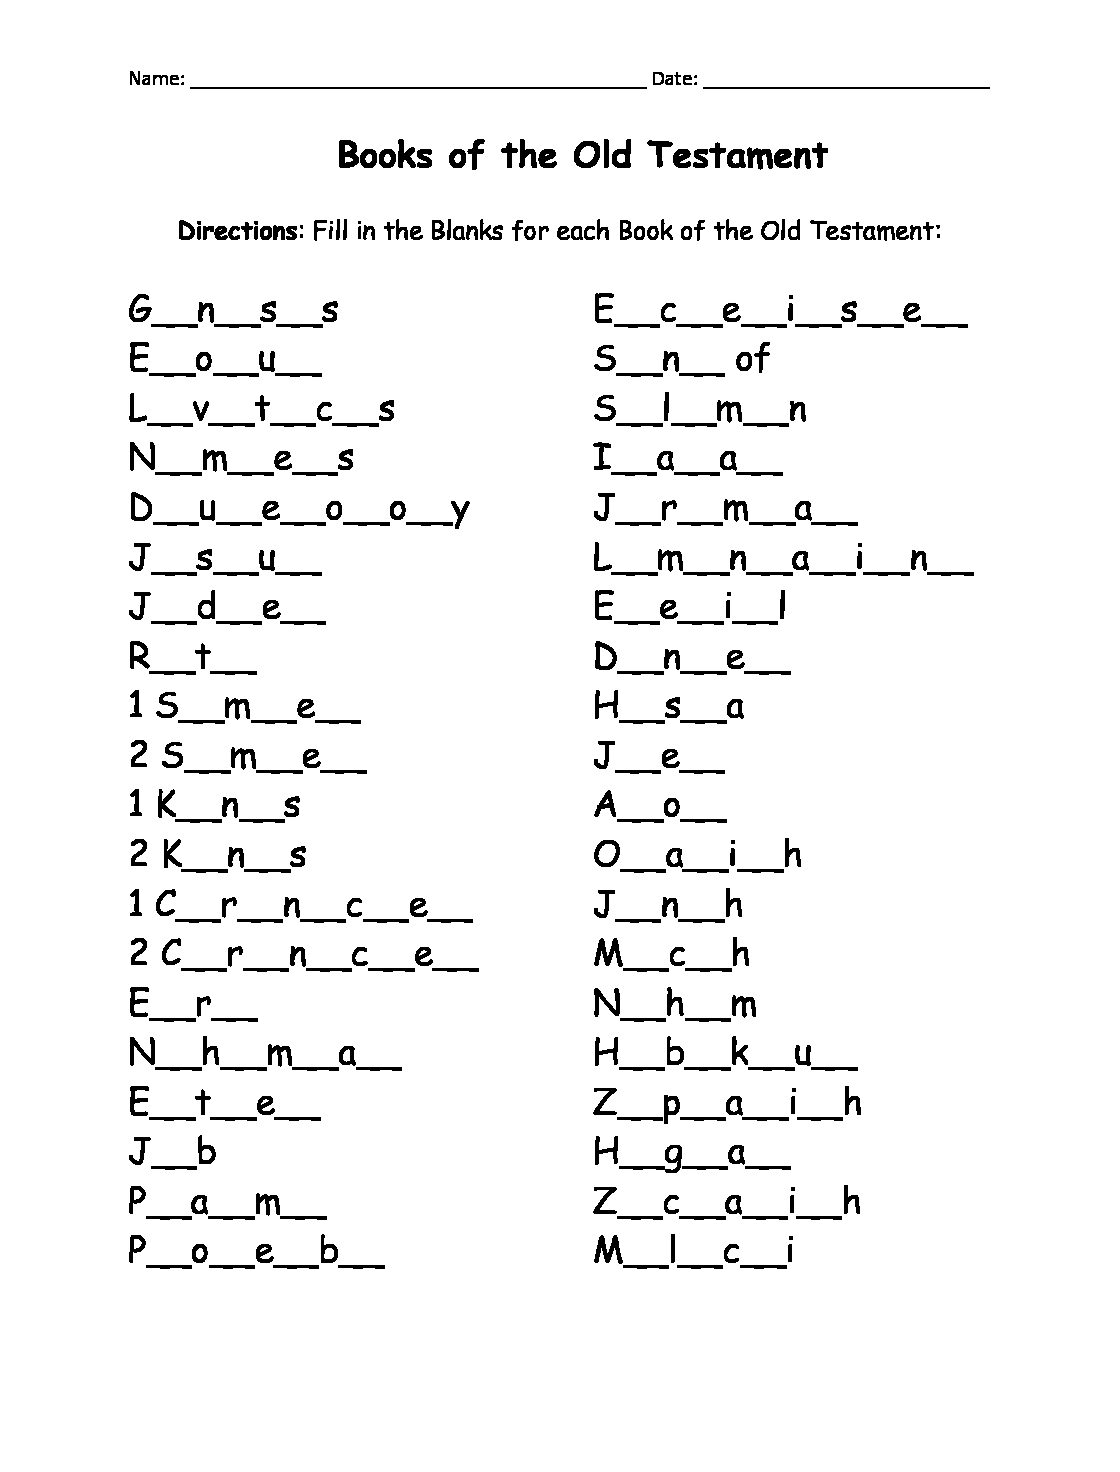 Books of the Old Testament Printable Fill in the Blanks Activity